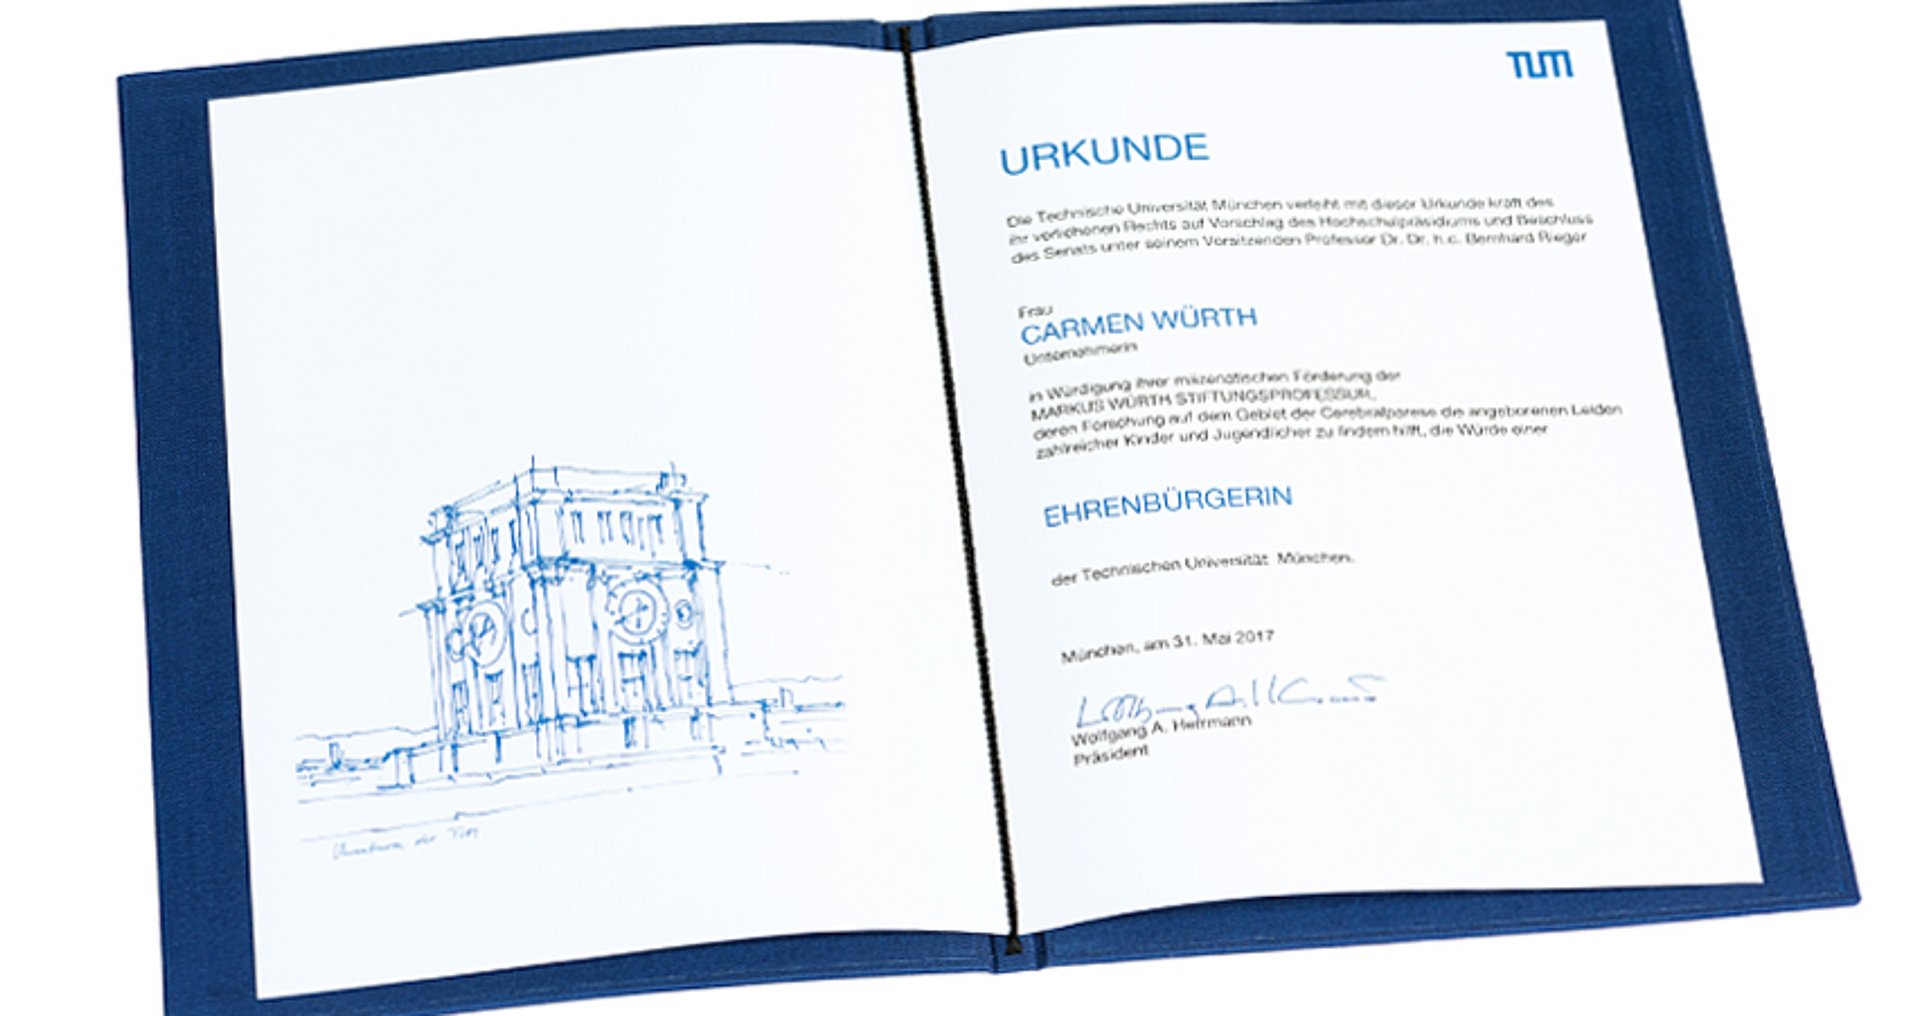 An opened certificate confirming Carmen Würth’s nomination to the status of Honorary Citizen of the TUM